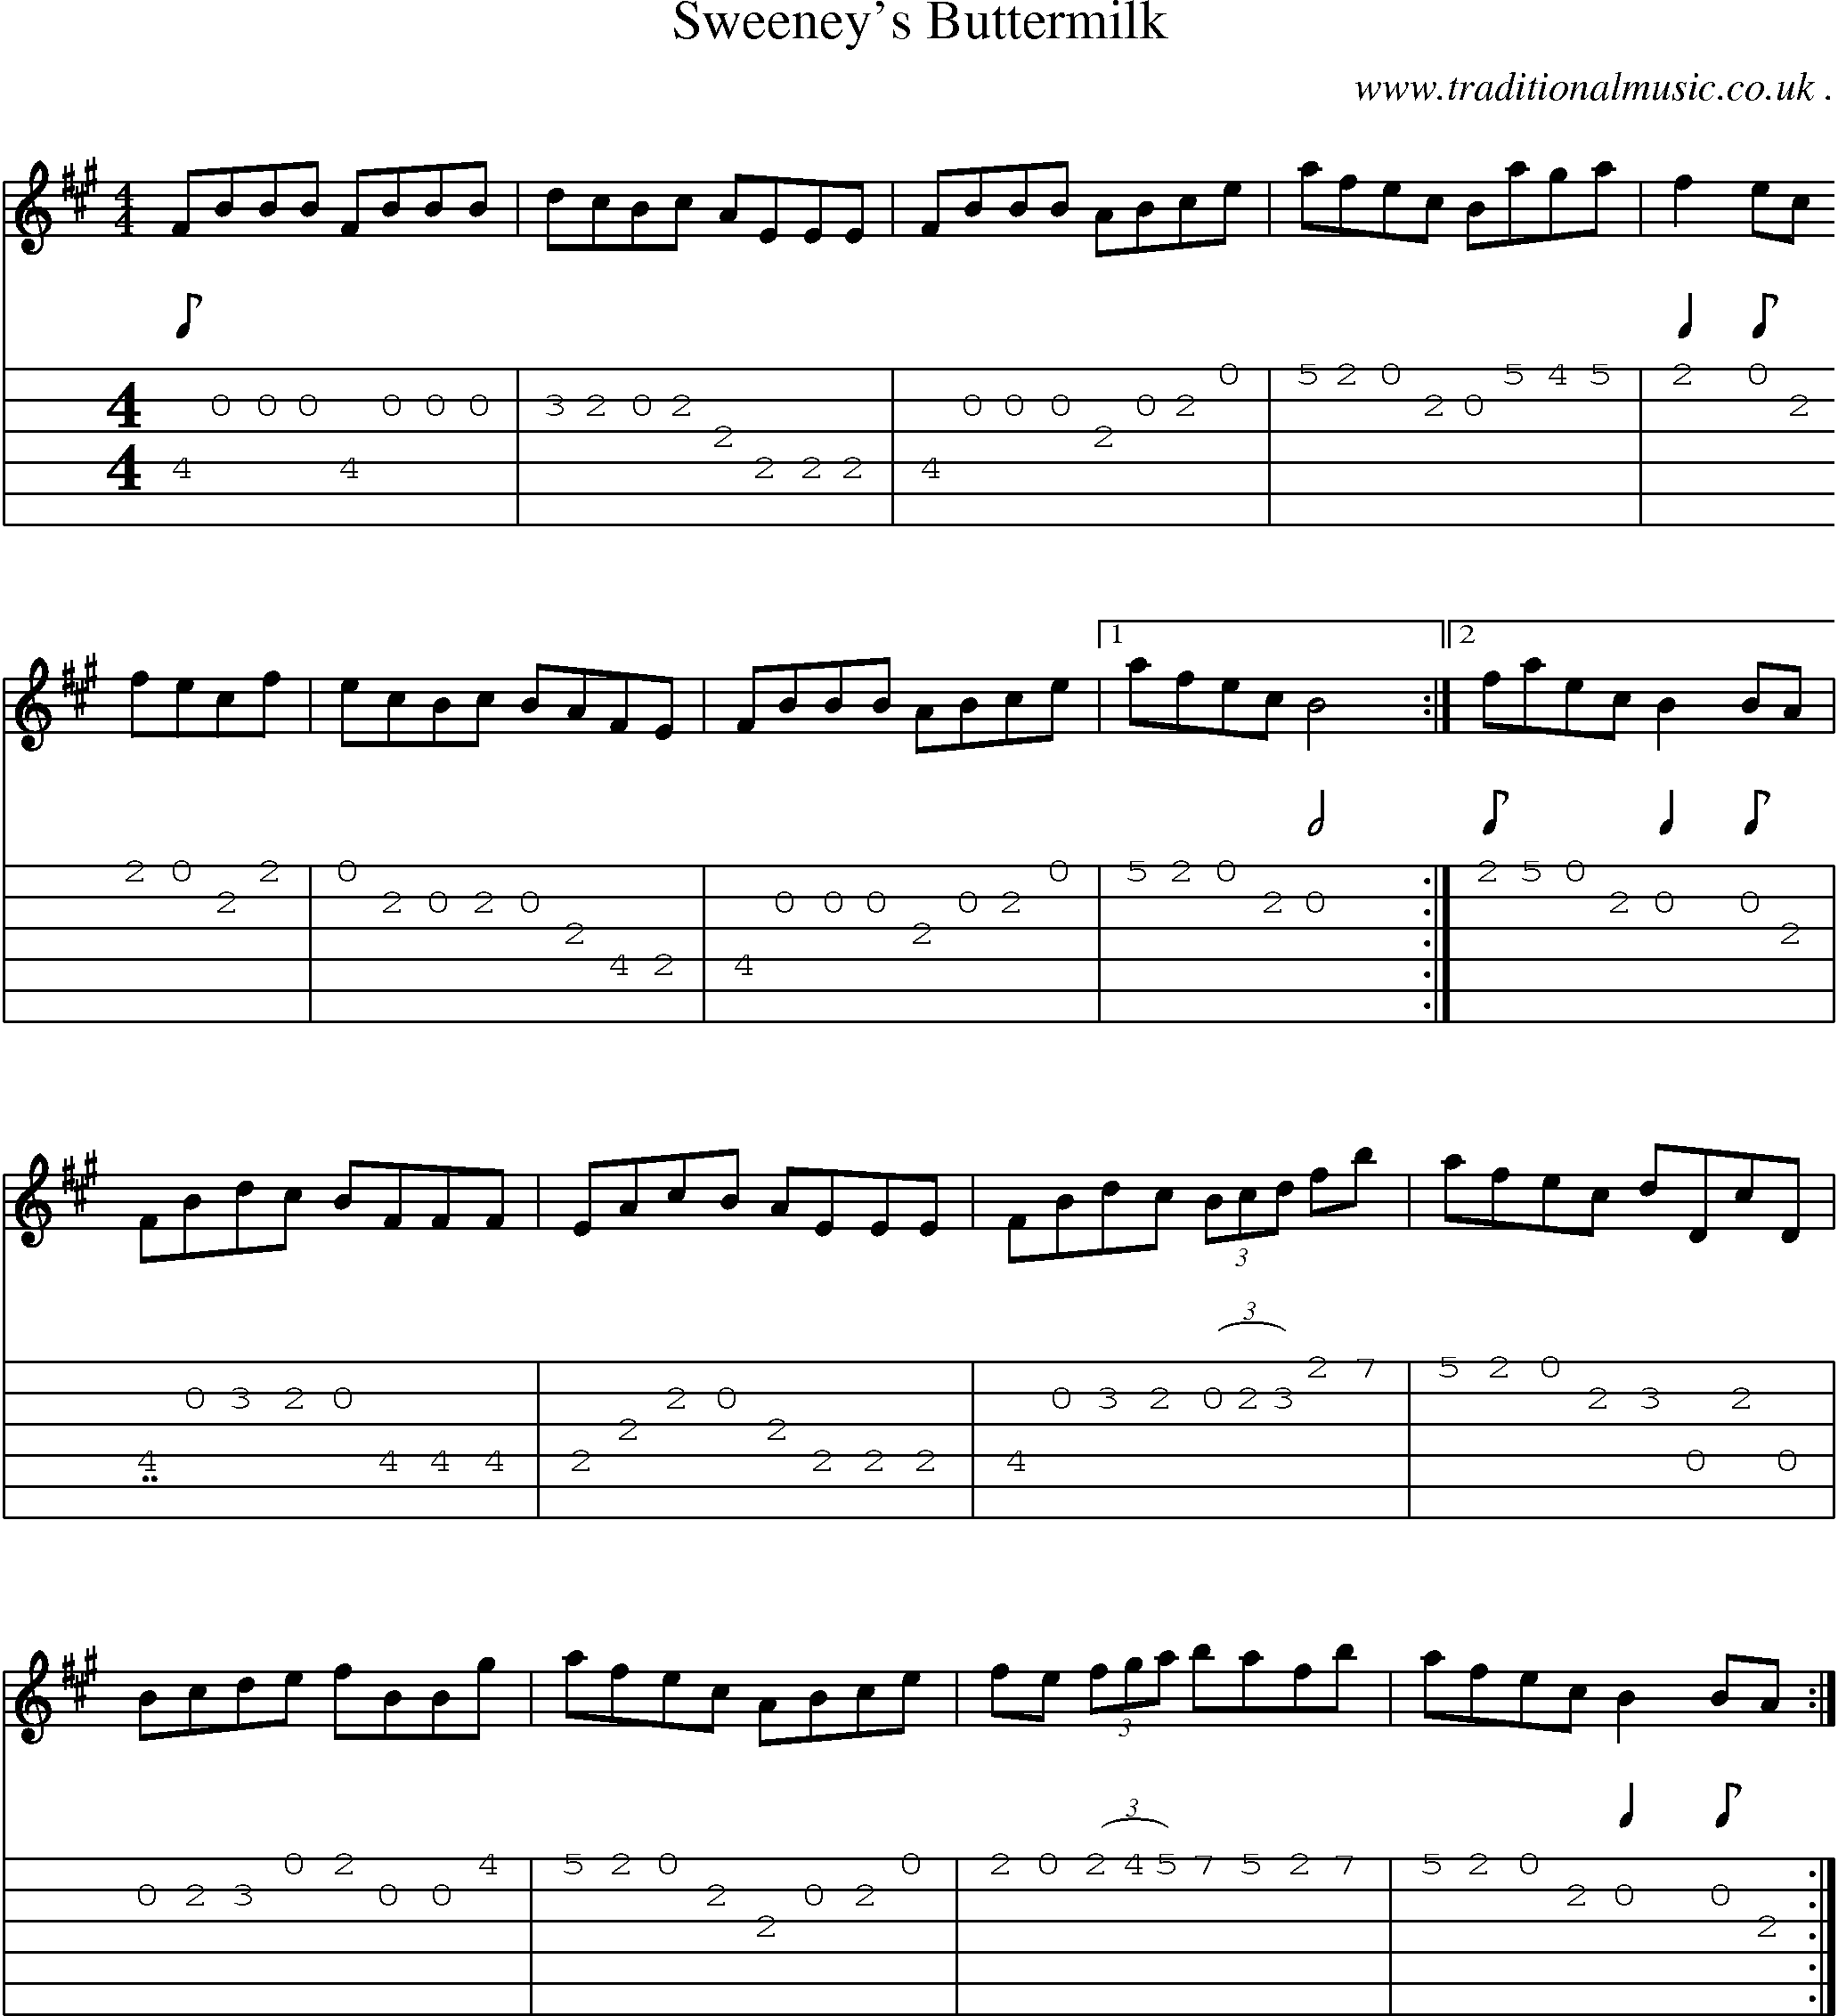 Sheet-Music and Guitar Tabs for Sweeneys Buttermilk